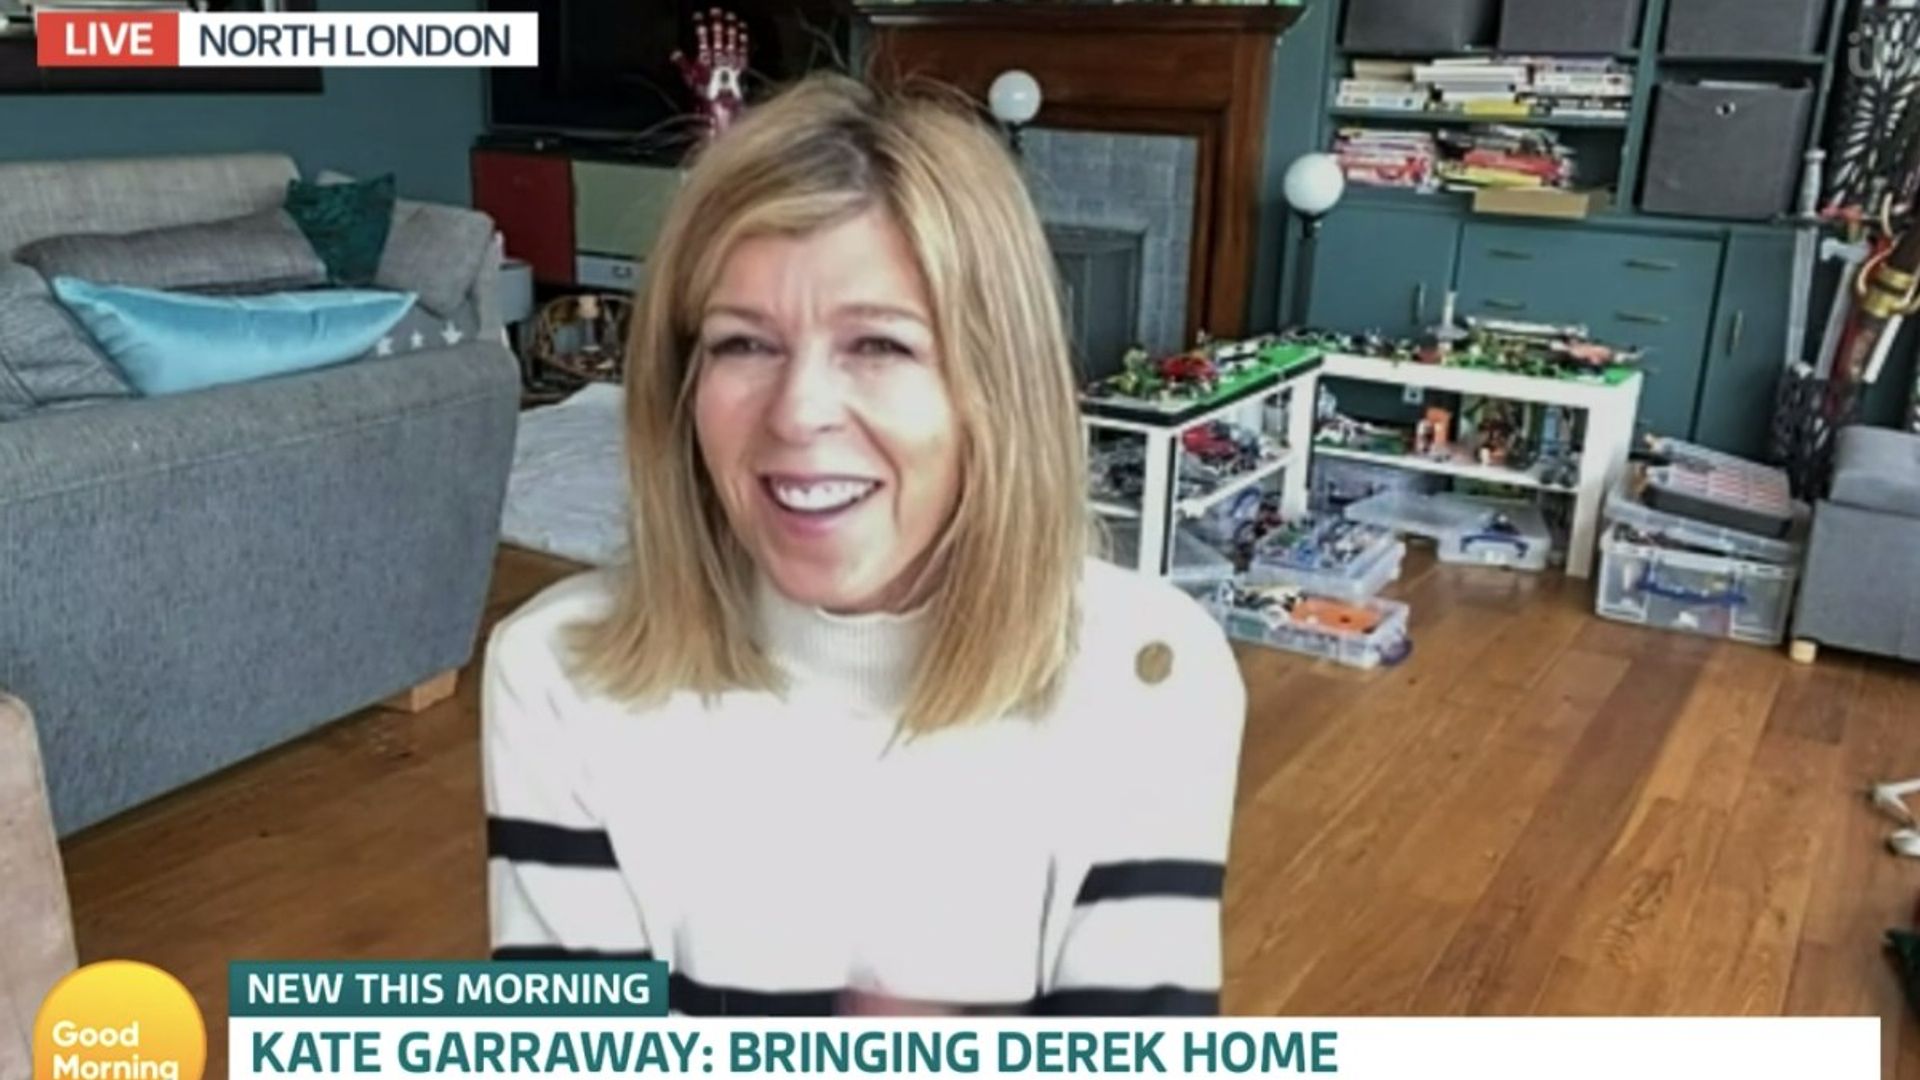 Derek Draper burst into tears after being reunited with kids and Kate Garraway at home